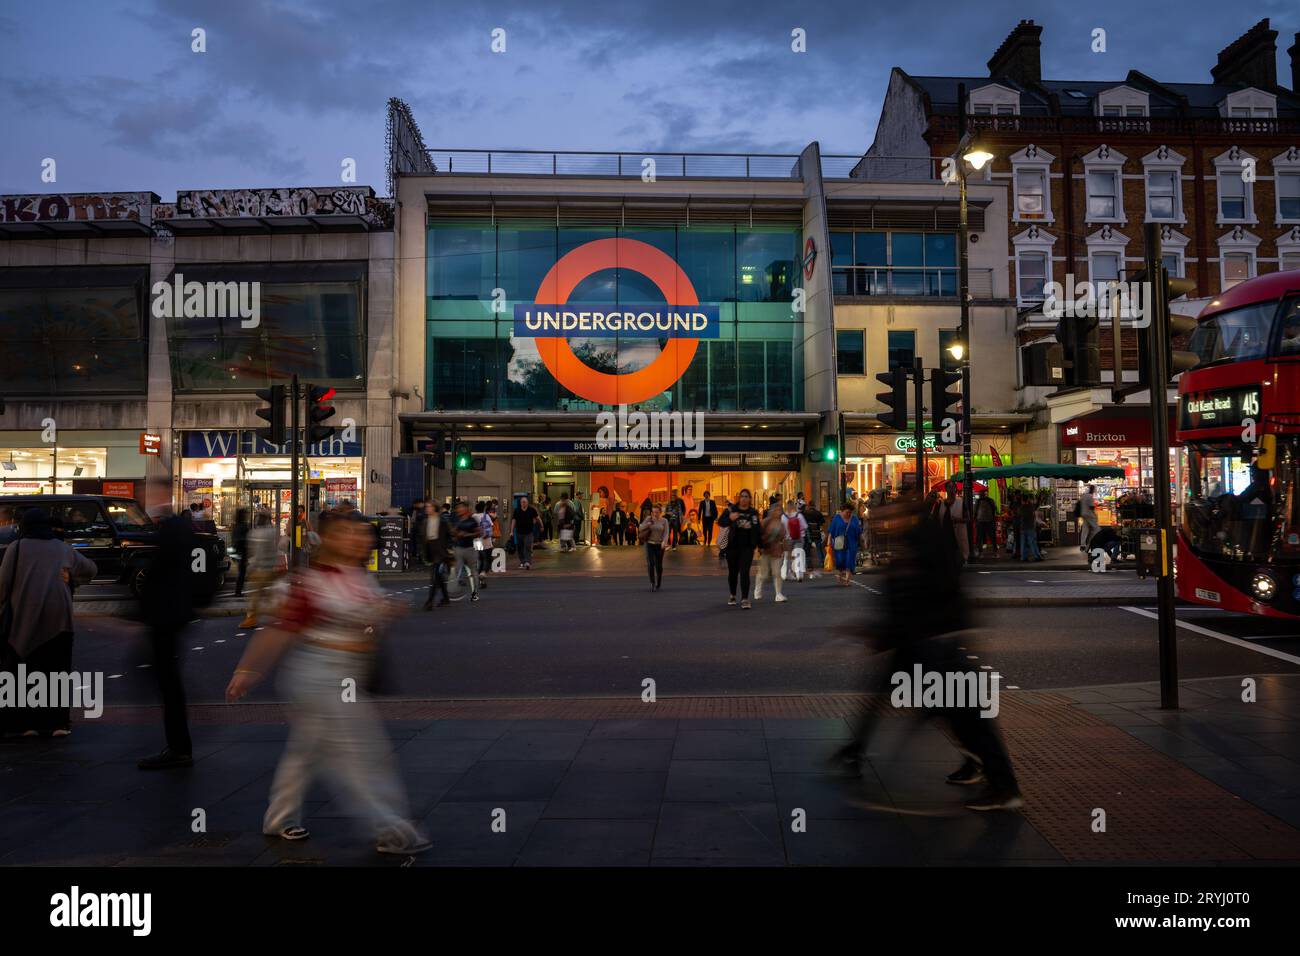 Brixton, London, UK: Pedestrian crossing on Brixton Road opposite Brixton underground station. Evening view with people and traffic. Stock Photo